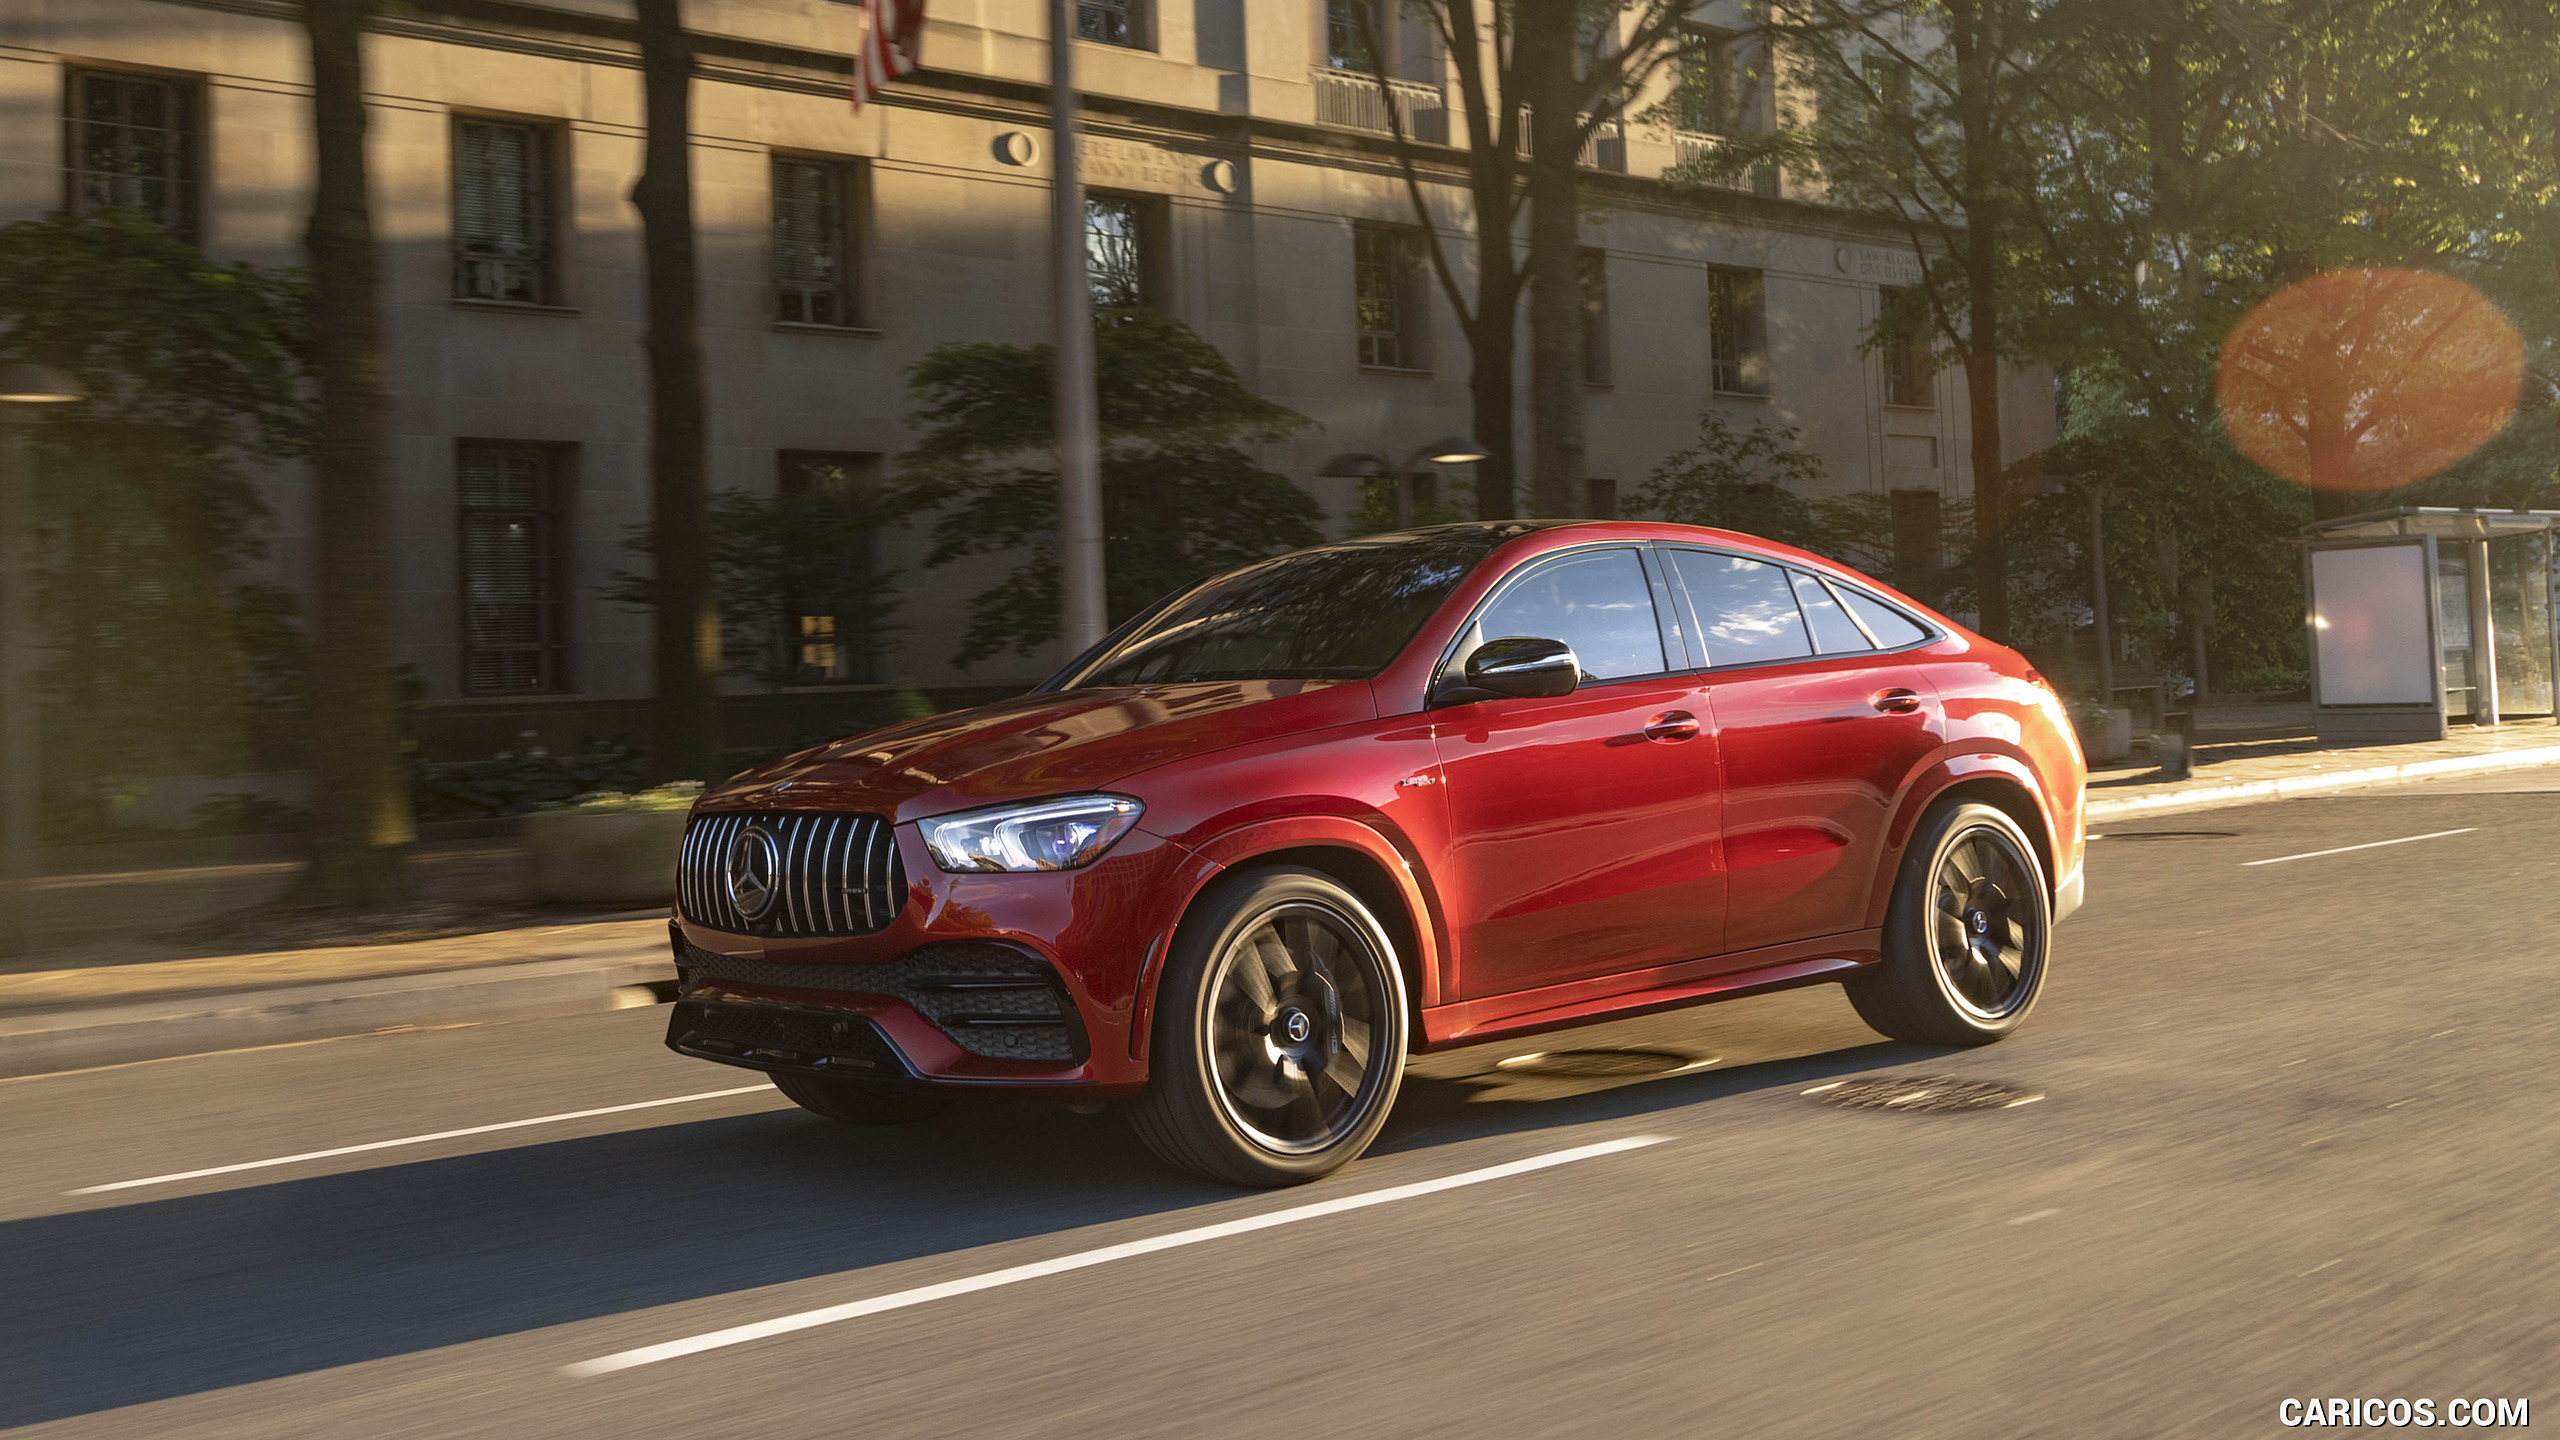 2021 Mercedes-AMG GLE 53 Coupe - Front Three-Quarter, #115 of 178